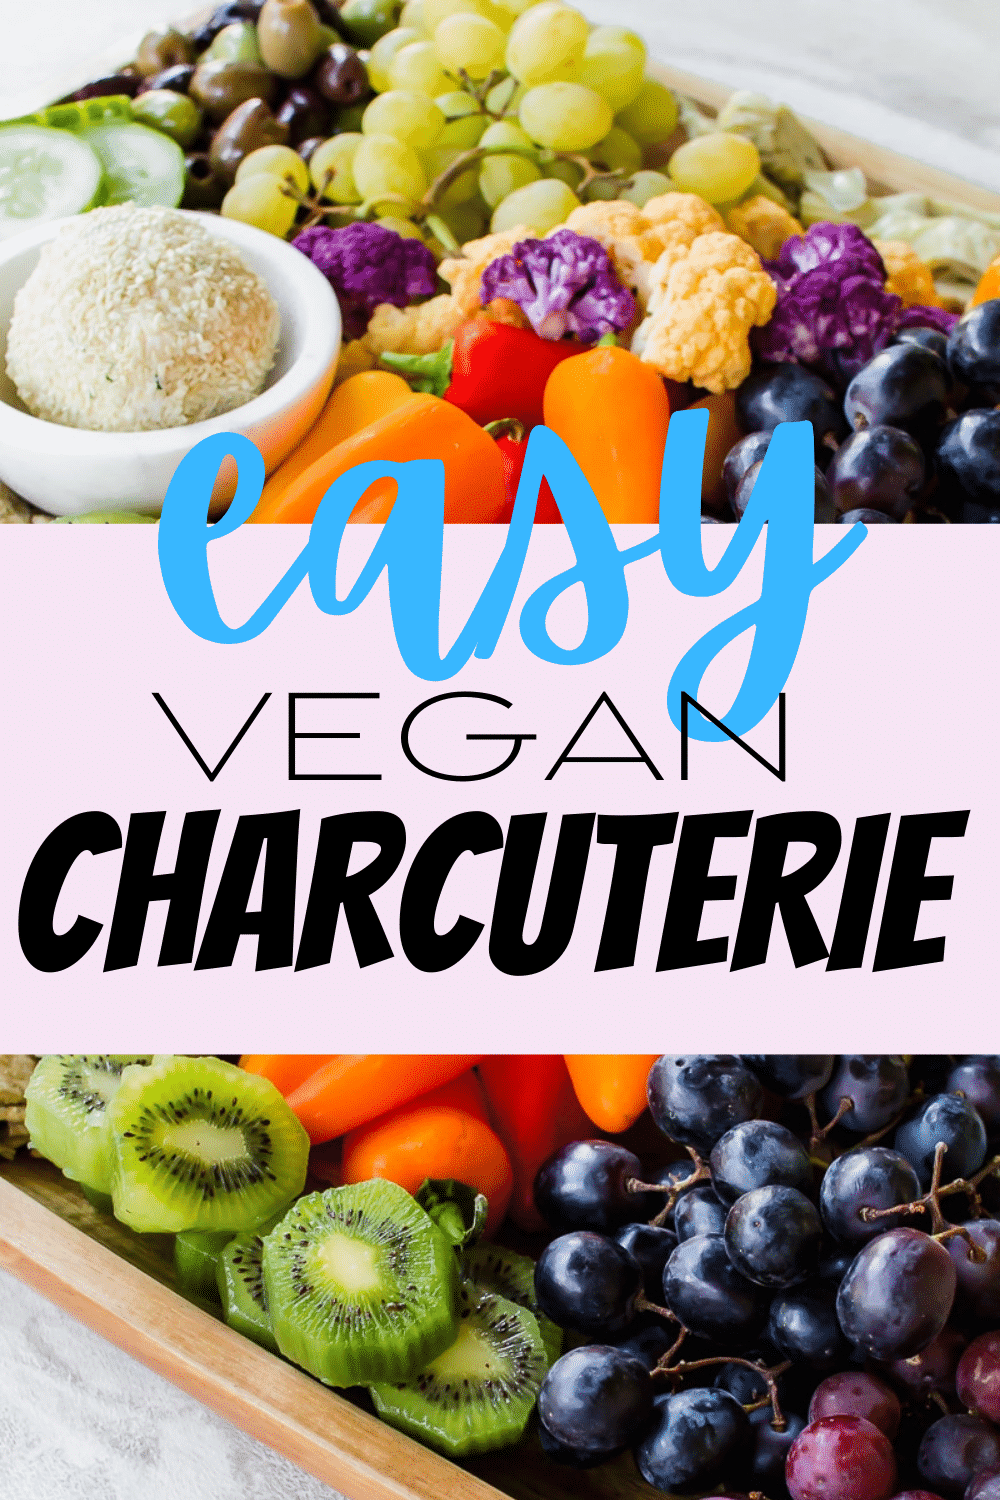 Vegan Charcuterie anyone? This Vegan Charcuterie Board will be your newest obsession. Push aside the traditional meat and cheese platter and welcome this vegan option! #vegancharcuterie #vegetariancharcuterie